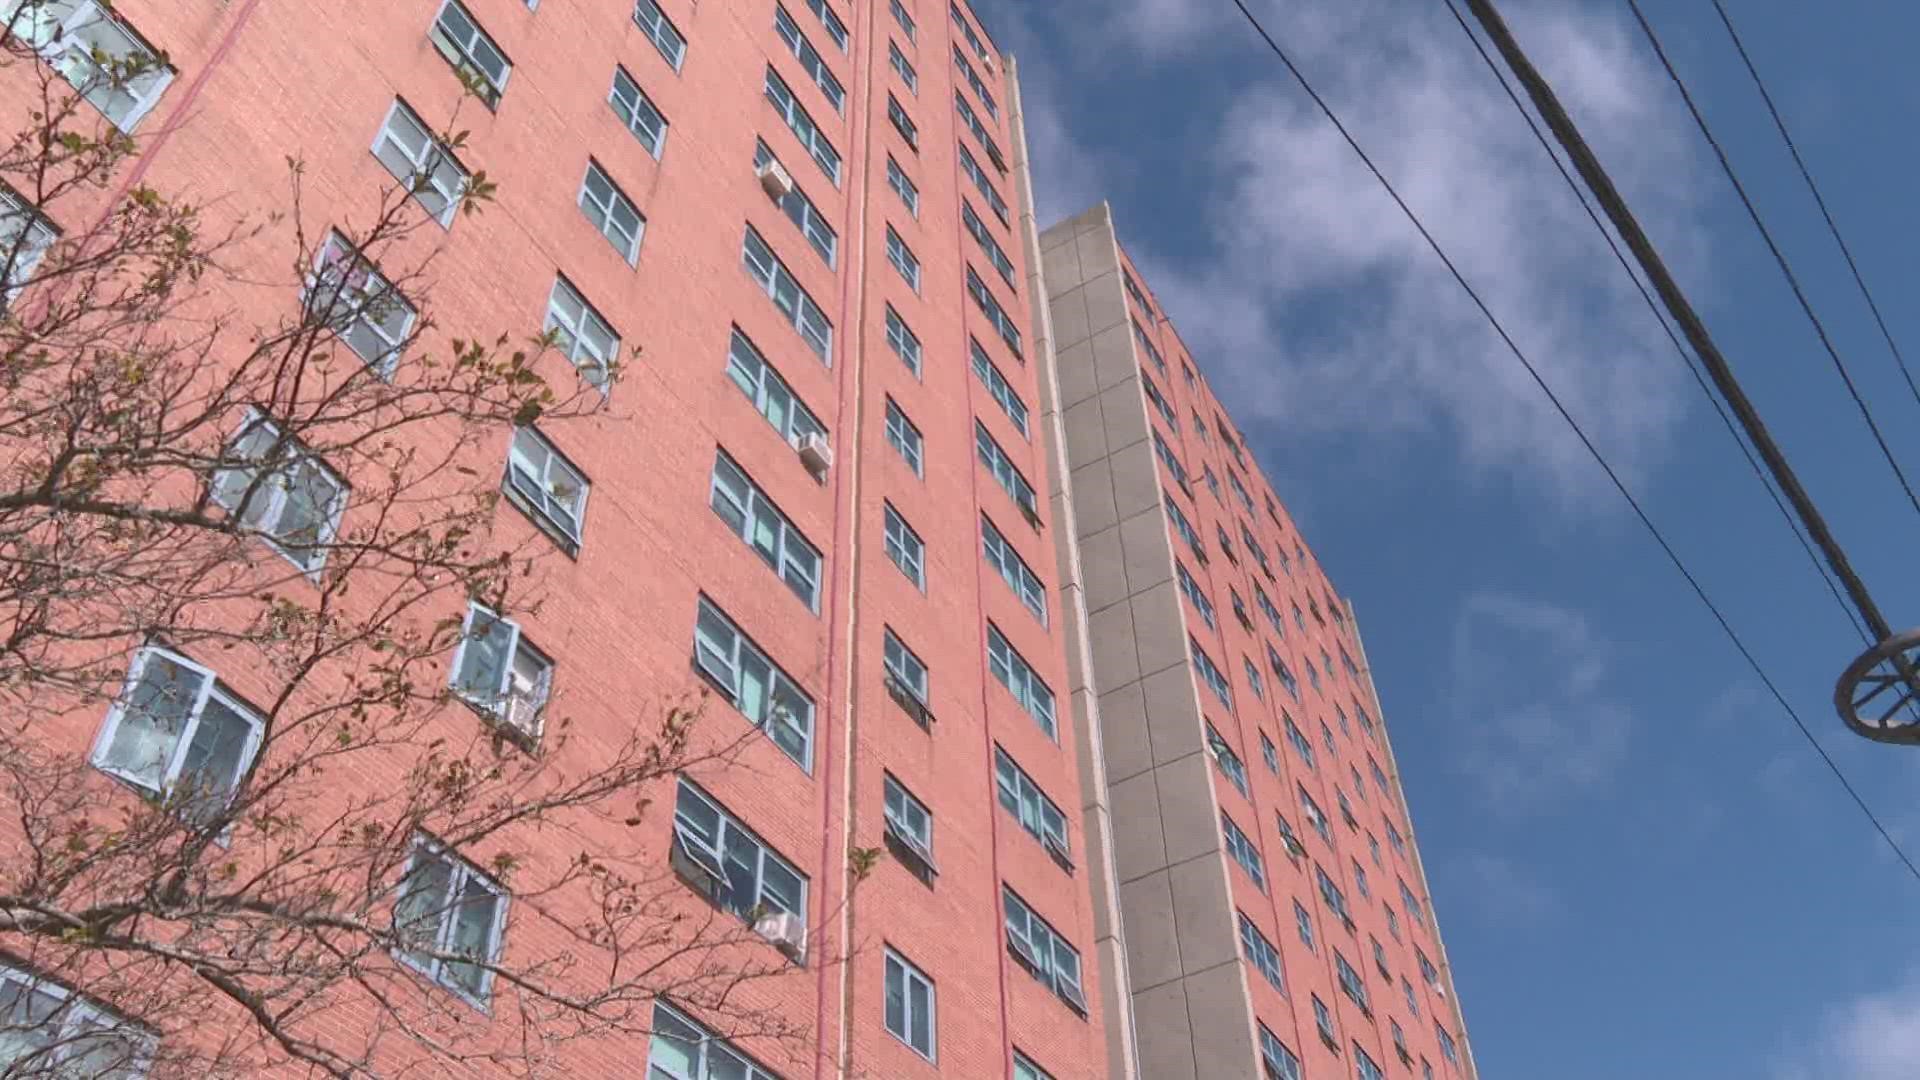 Residents on floors 7-16 had only been receiving low-load power to their apartments for roughly three weeks after it's believed the building was struck by lightning.